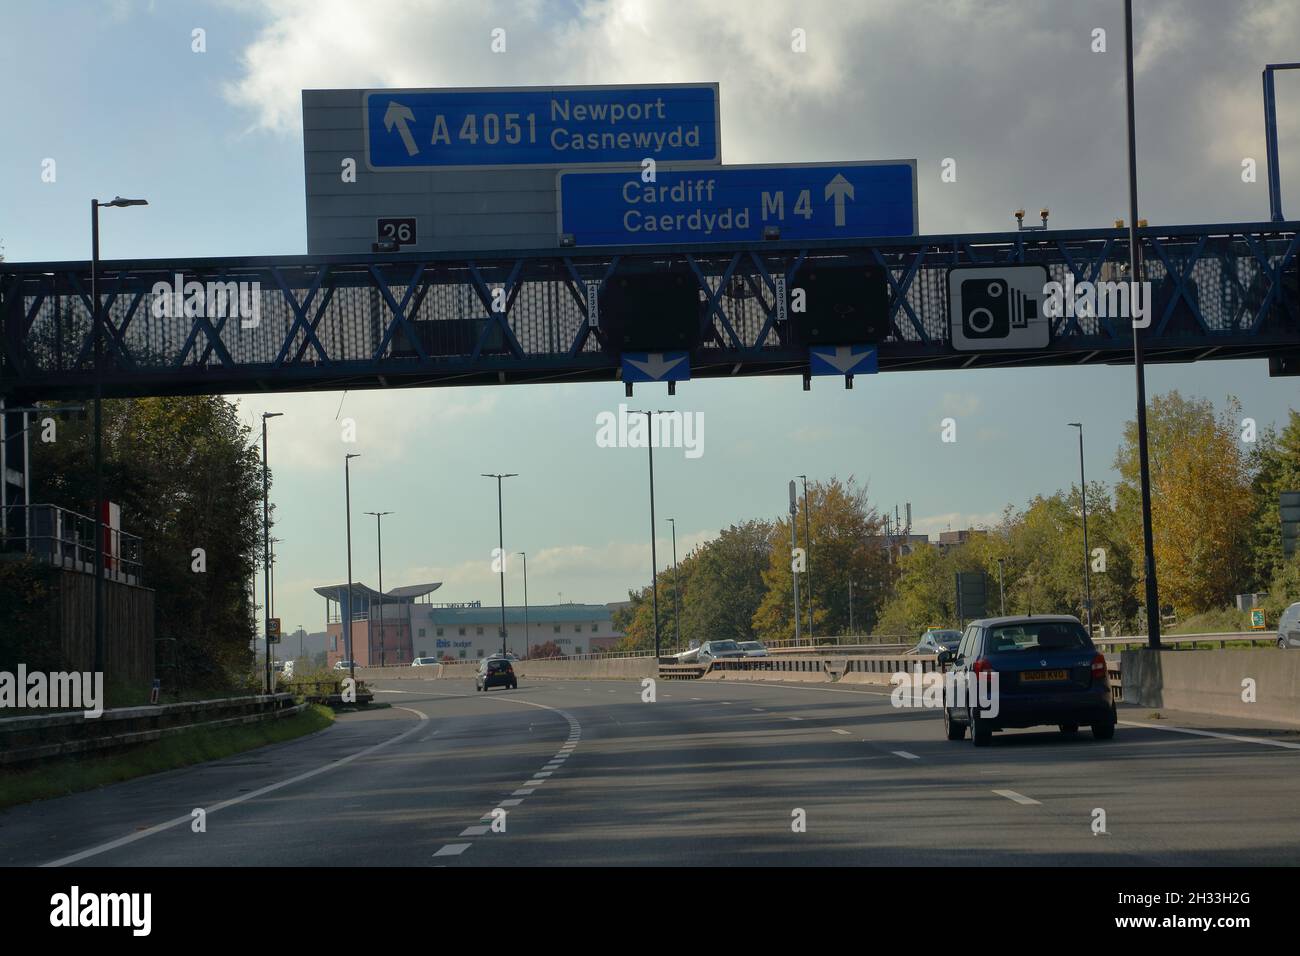 Junction 26 with a lane off to Newport (Casnewydd)  leaving the motorway and signage for the main route. Stock Photo